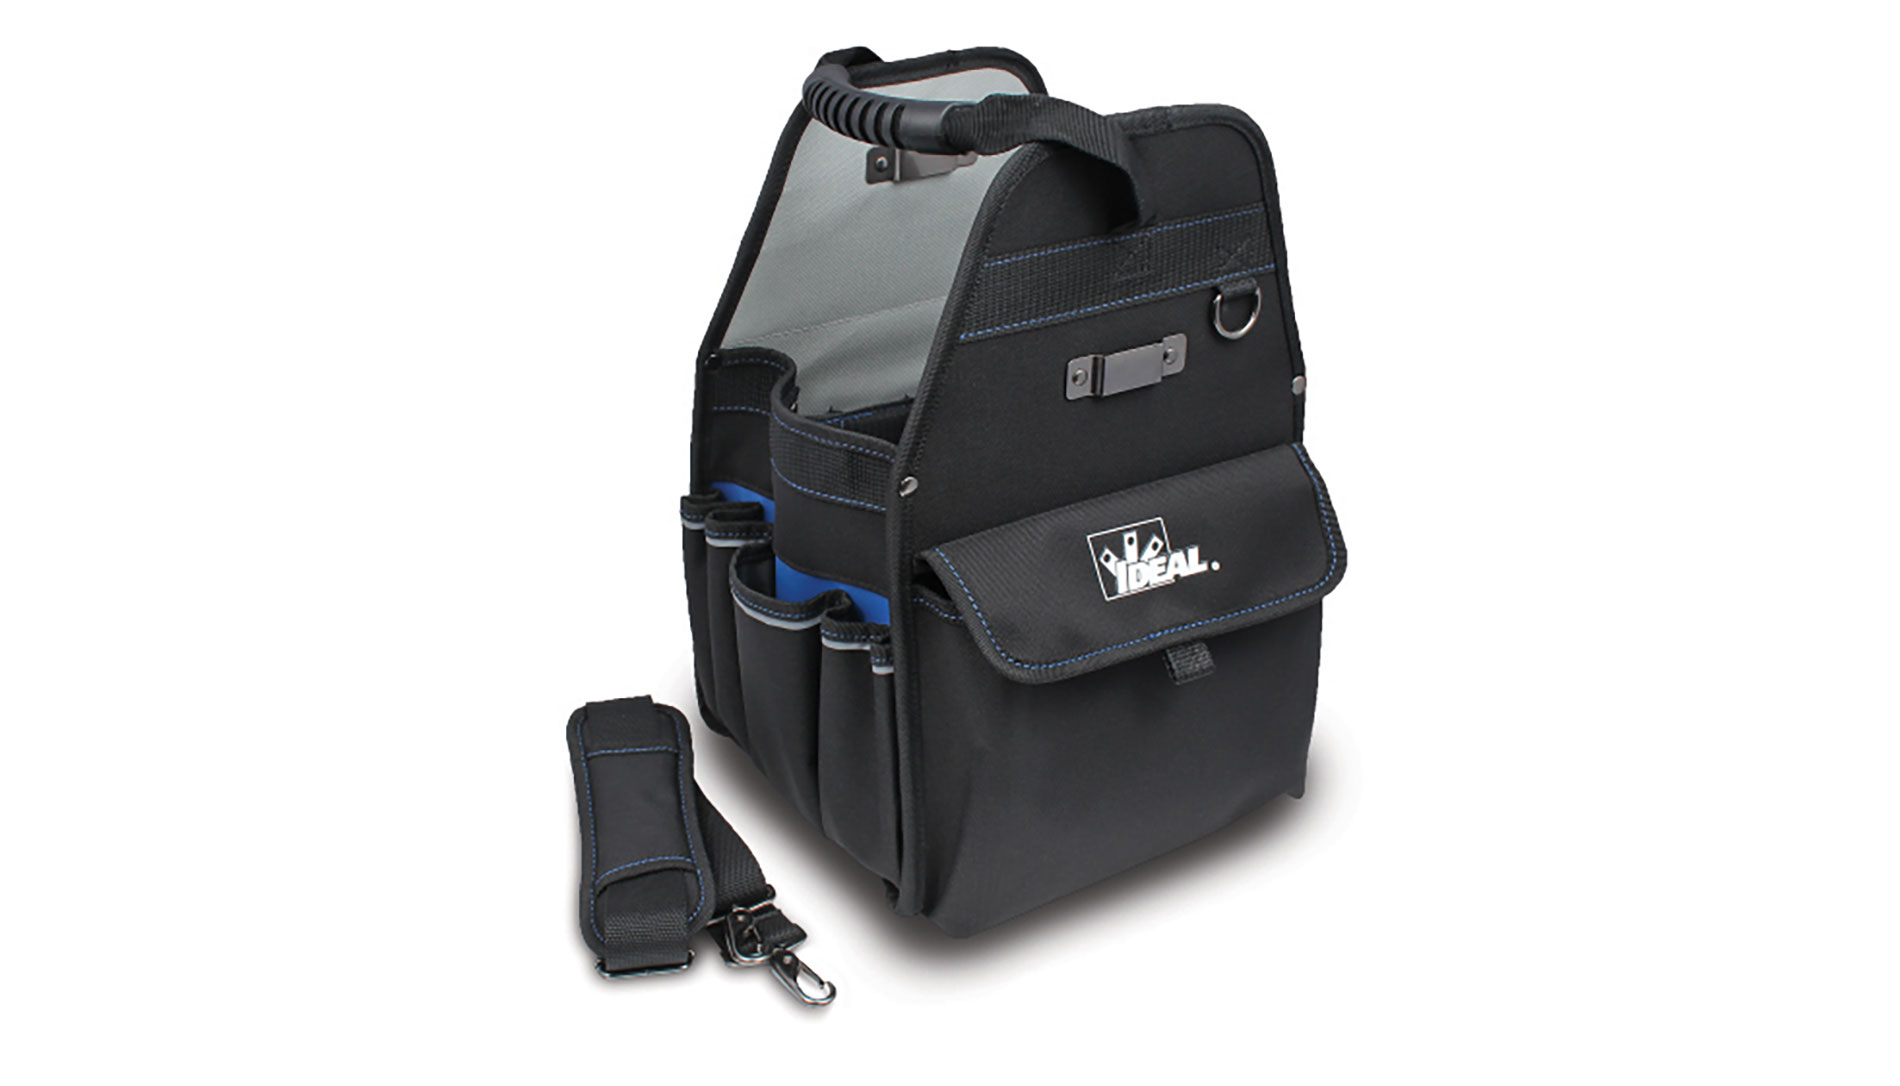 Ideal Industries’ Pro Series tool carrier